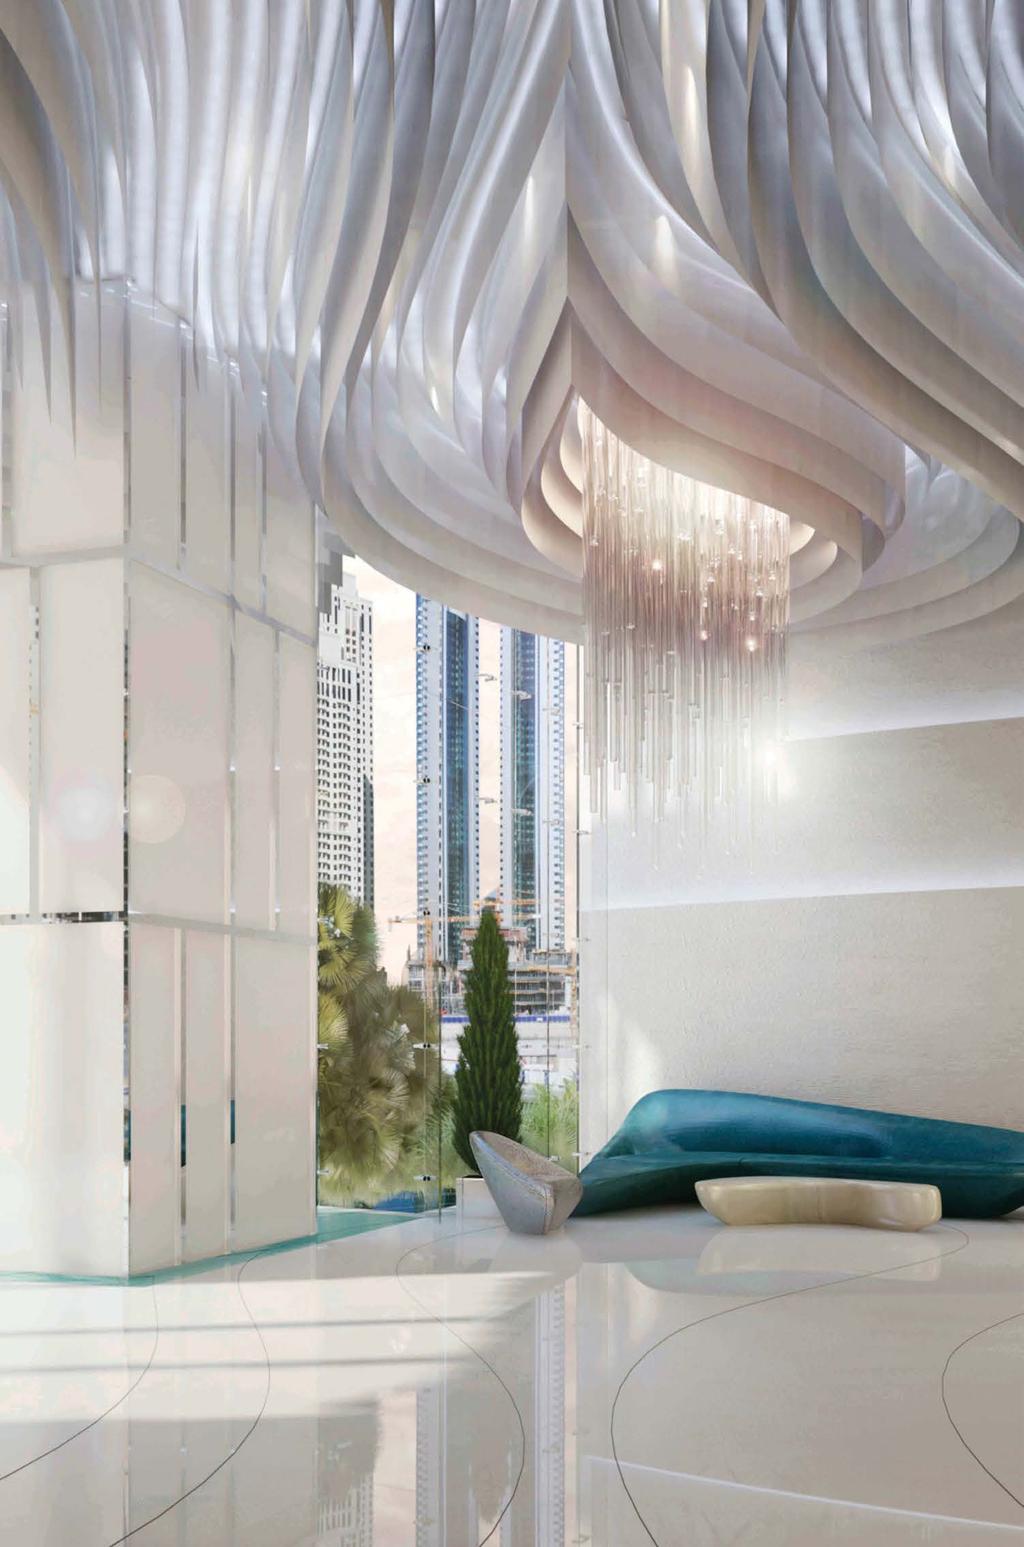 The luxurious lobby at DAMAC Heights will impress the most discerning visitors.